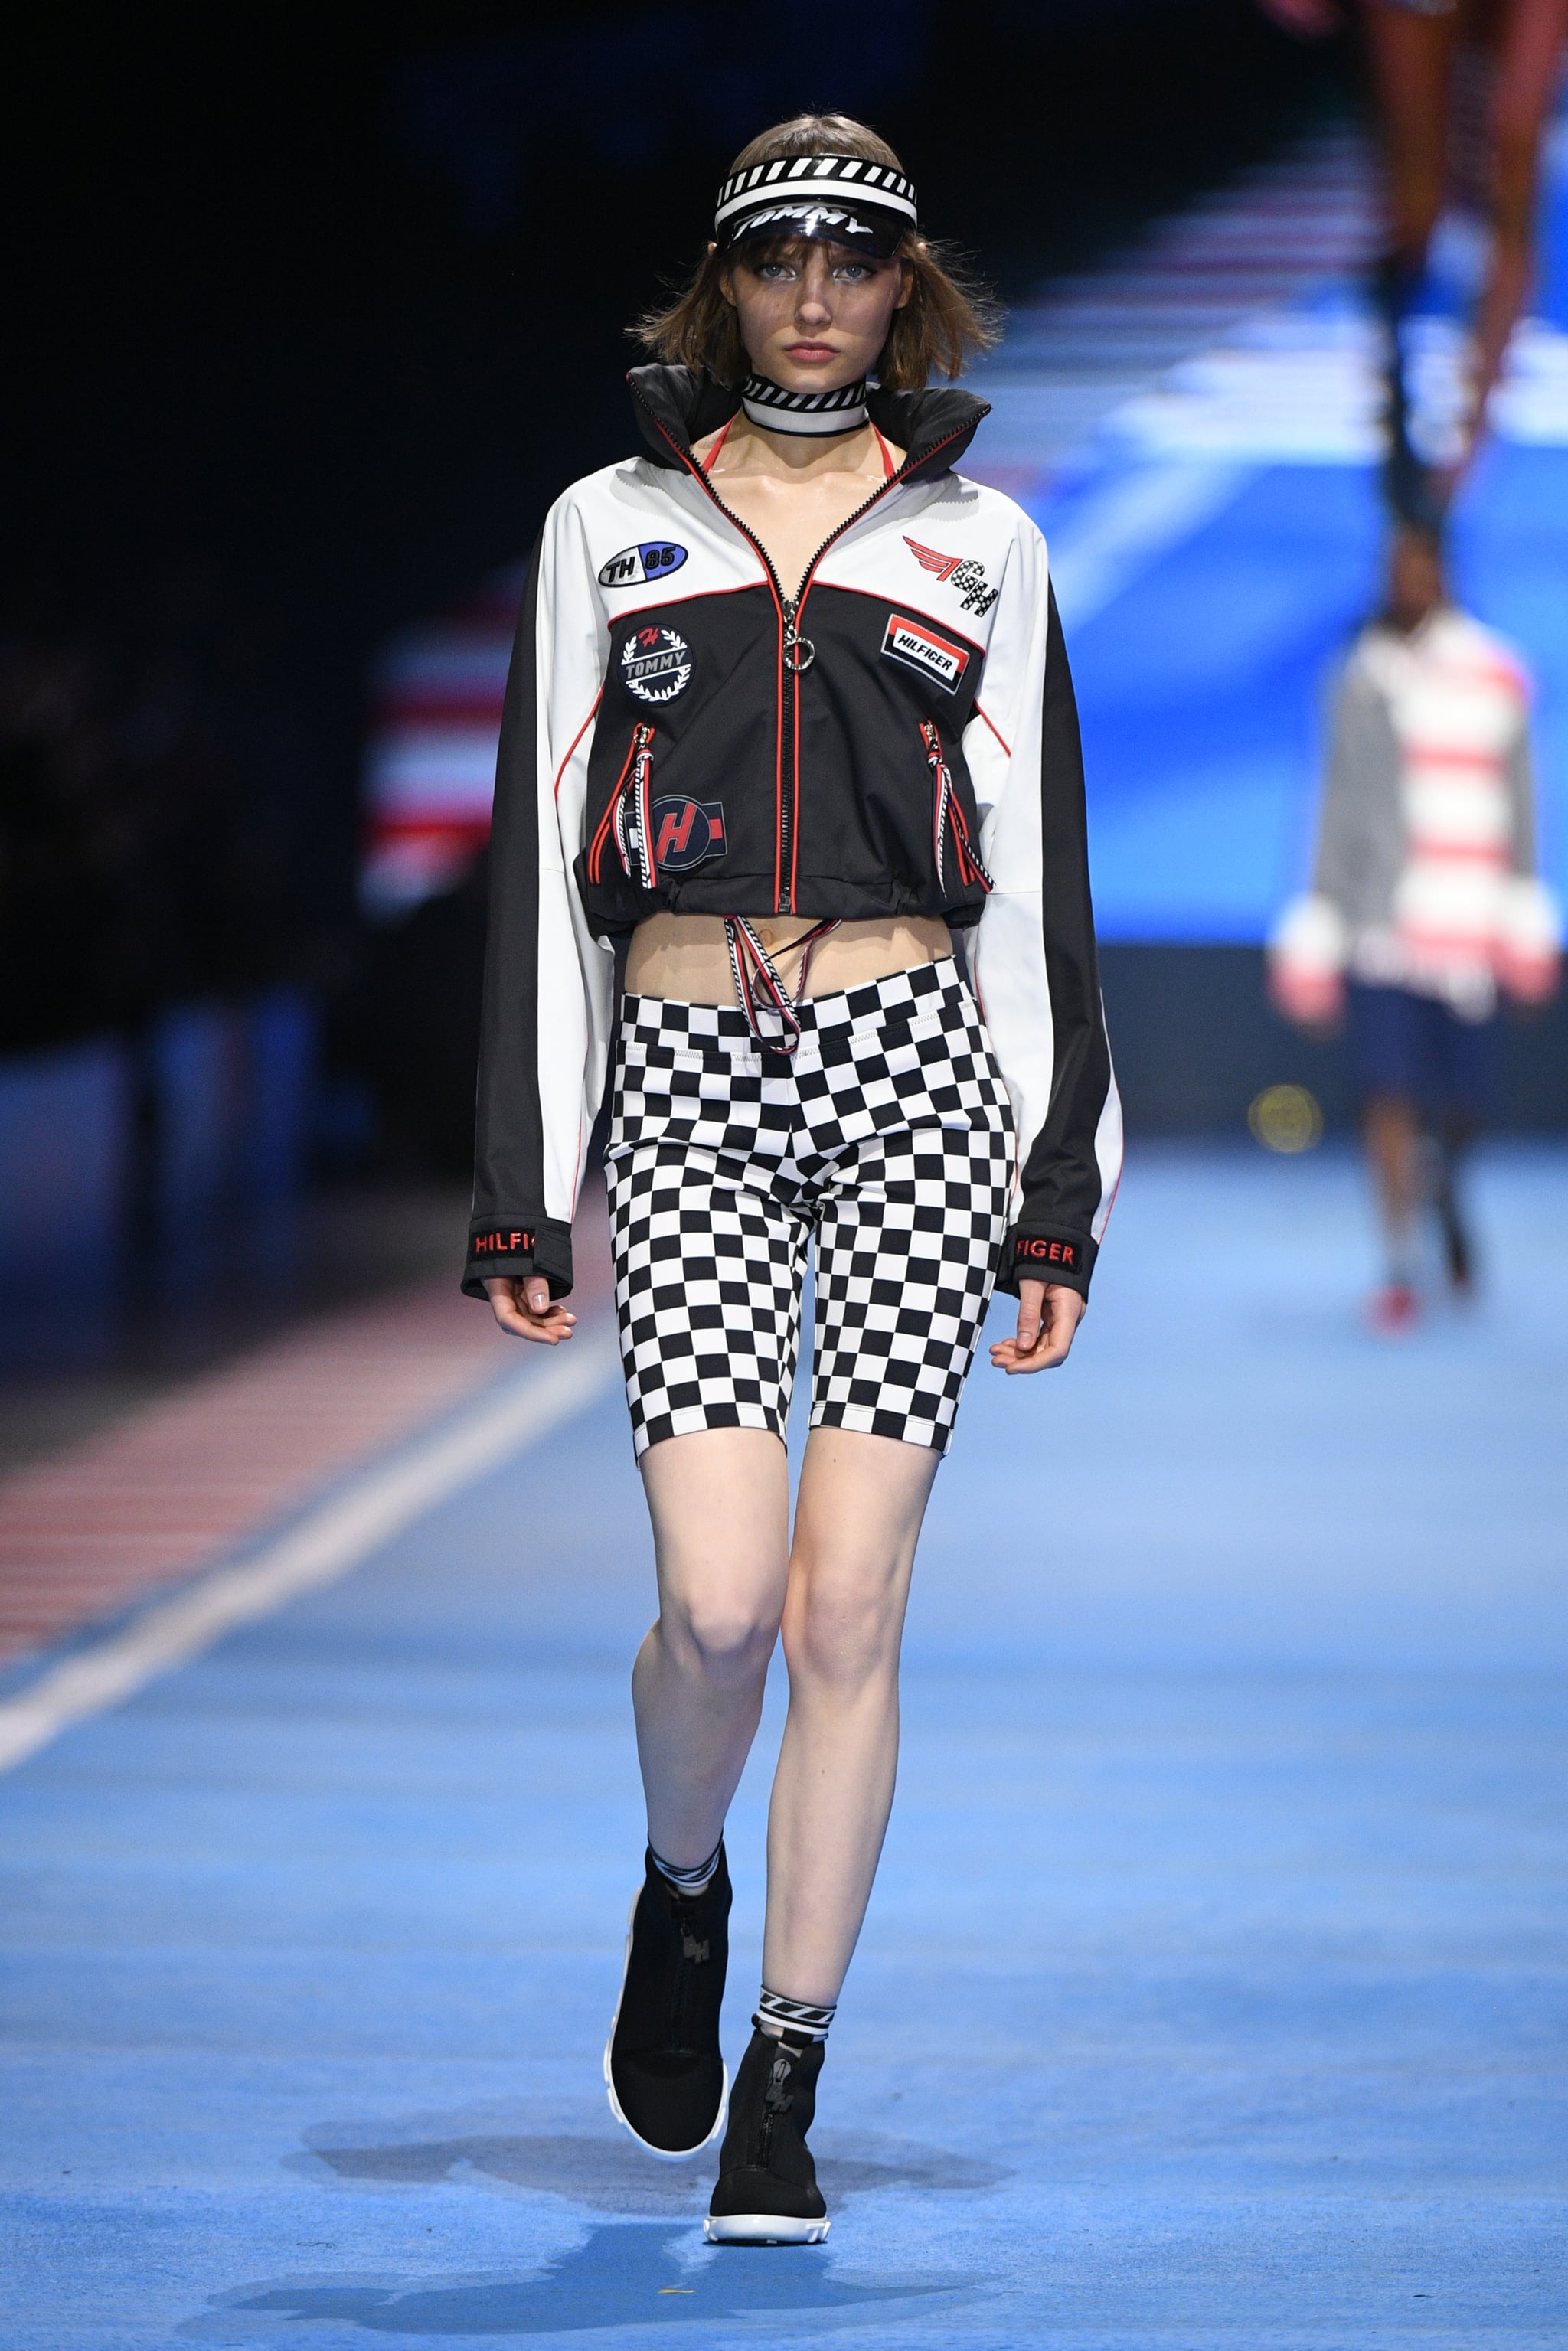 Fashion, Shopping & Style | All 3 Hadid Siblings Hit the Runway For Tommy Hilfiger and the F1-Inspired Collection Will Drive You Wild | POPSUGAR Fashion Middle Photo 10